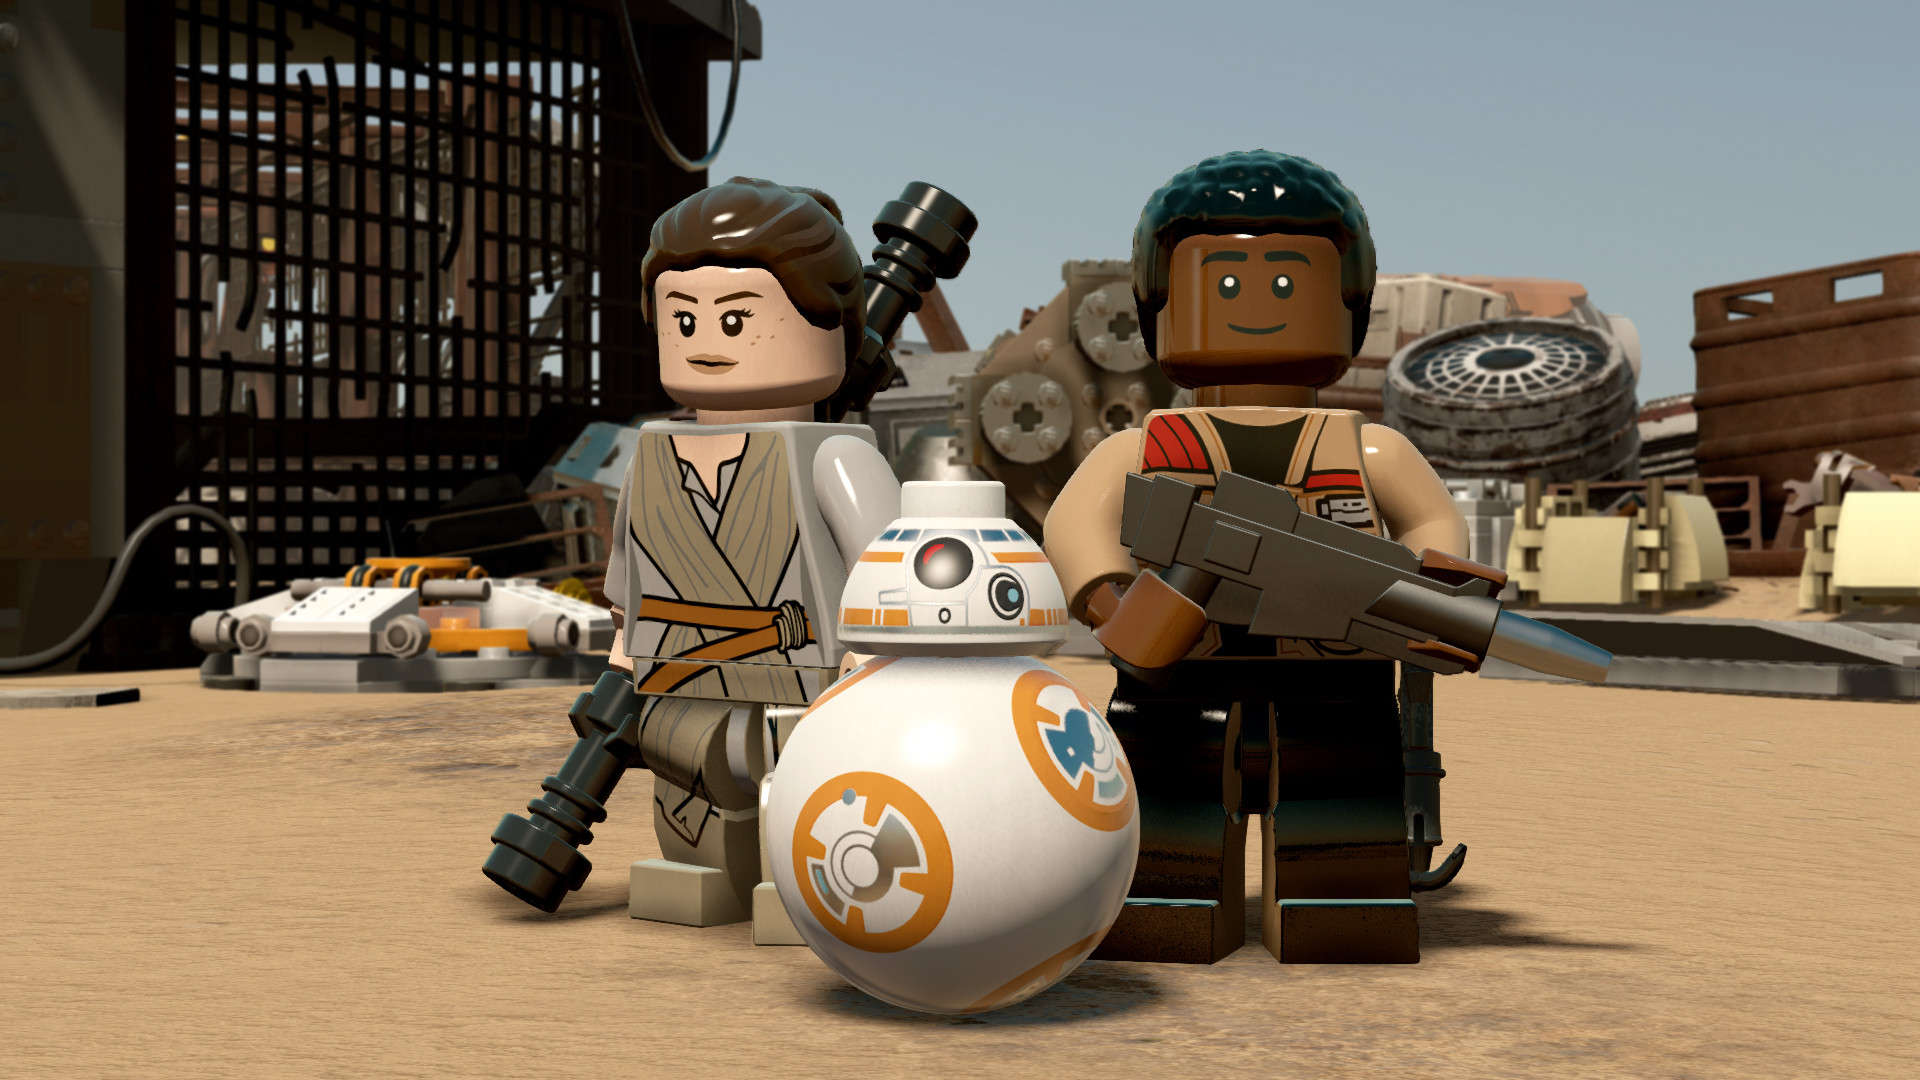 LEGO Star Wars: The Force Awakens Gold Edition Steam CD Key 5.64 $